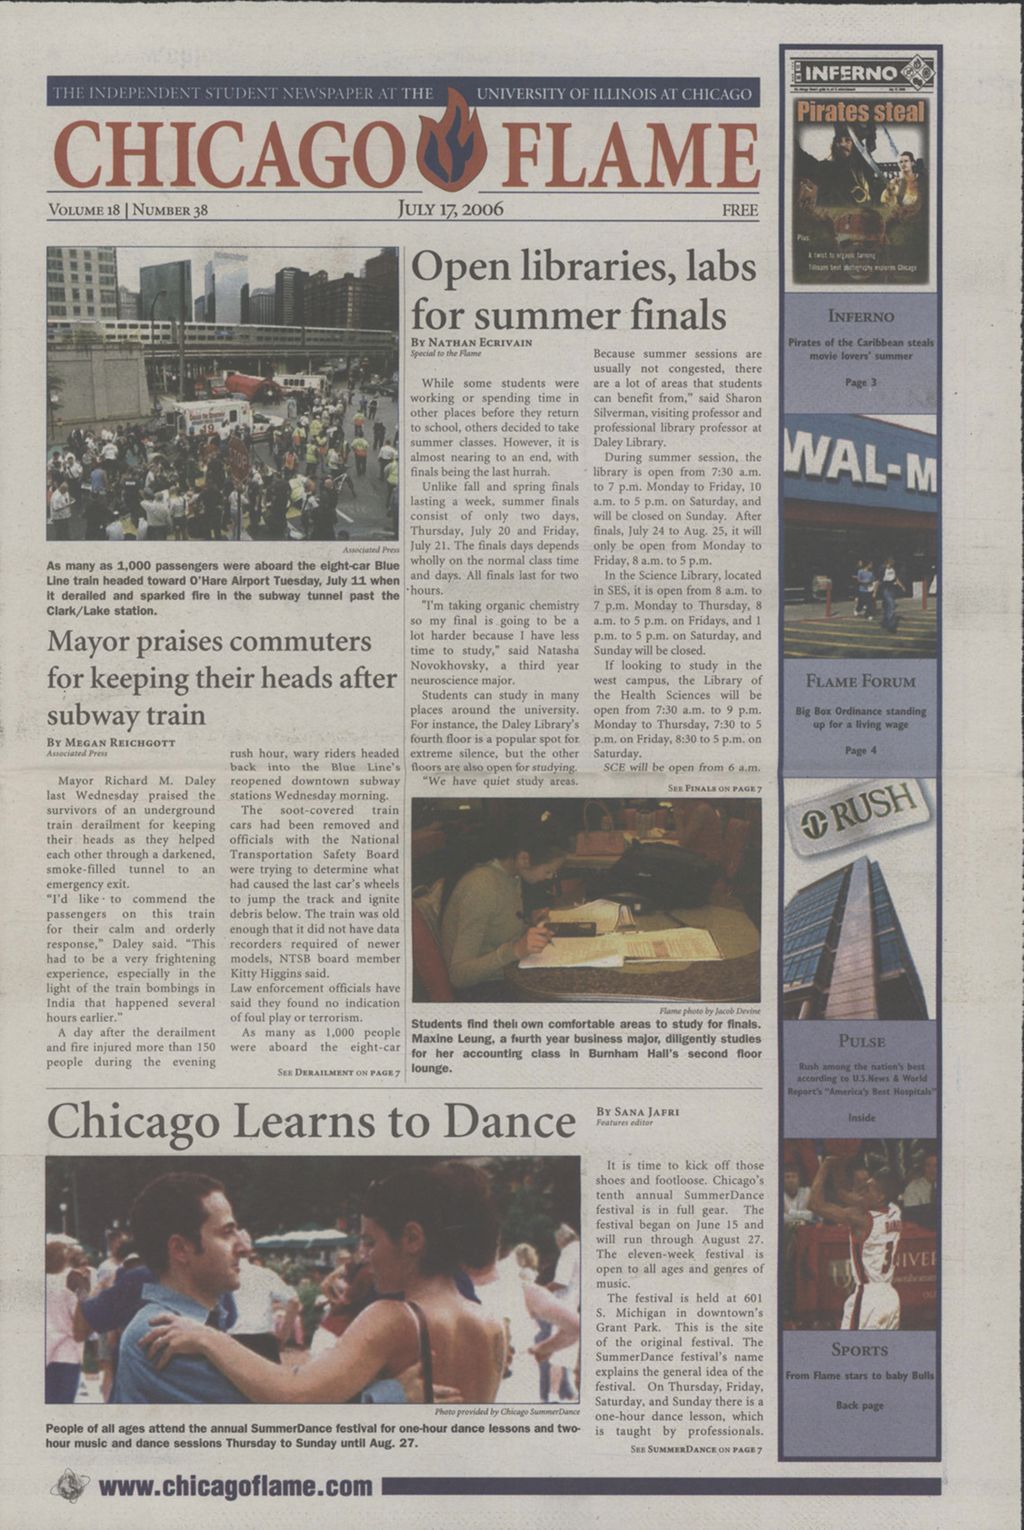 Chicago Flame (July 17, 2006)